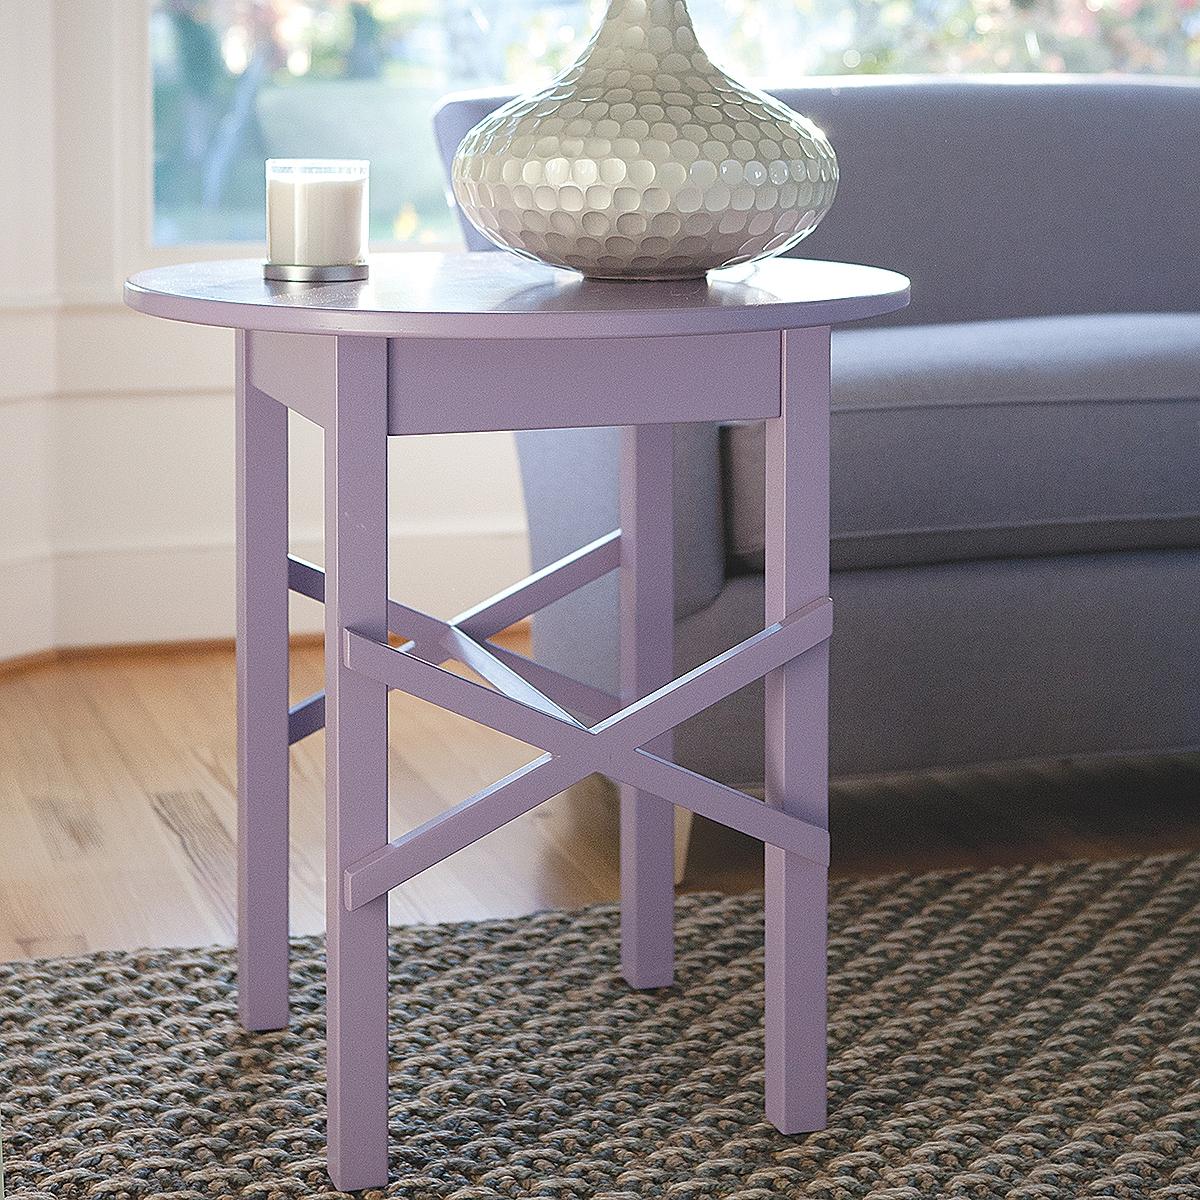 Maine Cottage Classic Cottage Sofa Table by Maine Cottage | Where Color Lives 